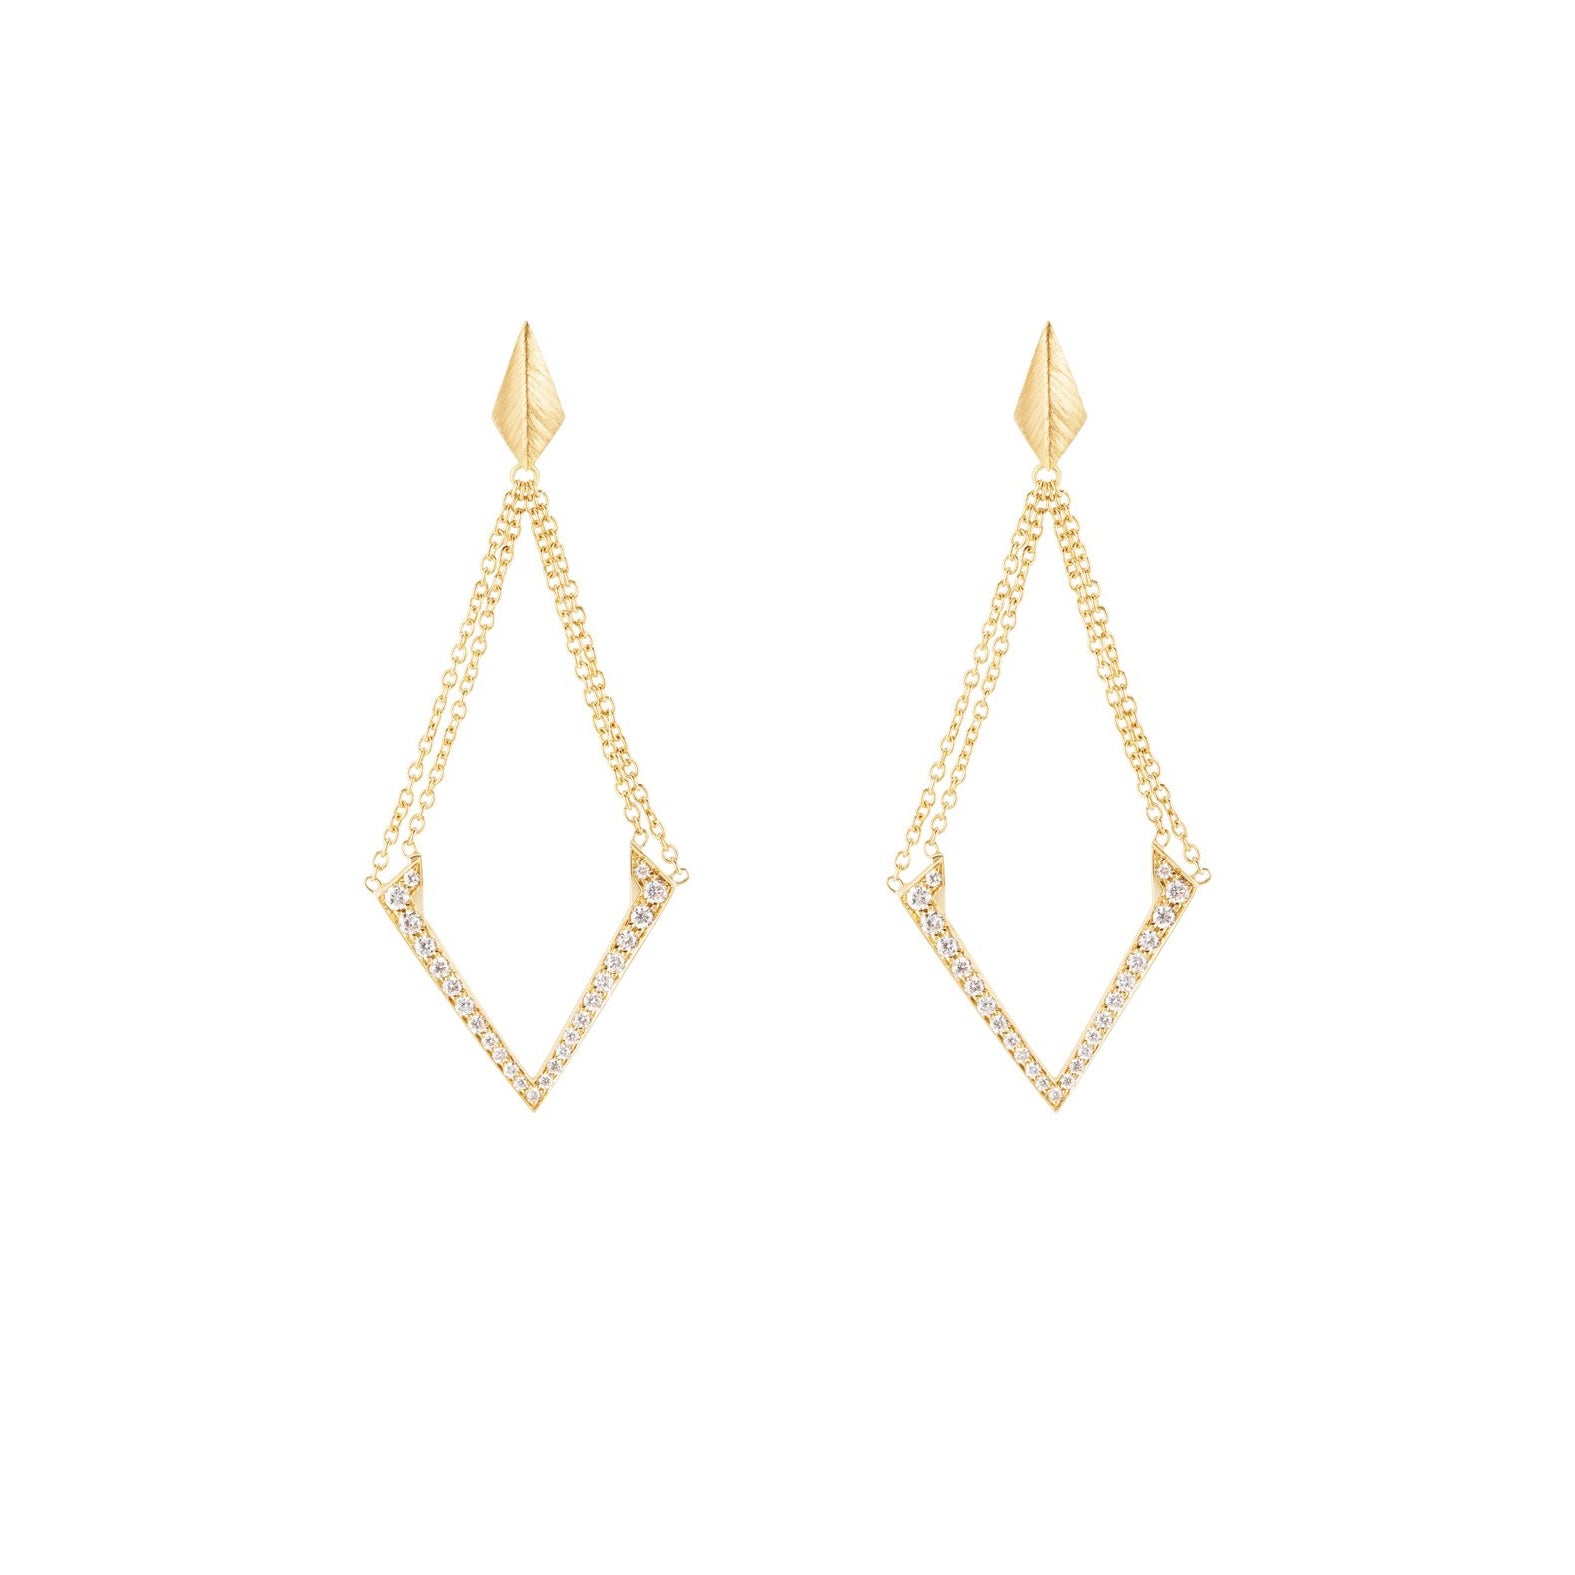 Details more than 183 normal gold earrings super hot